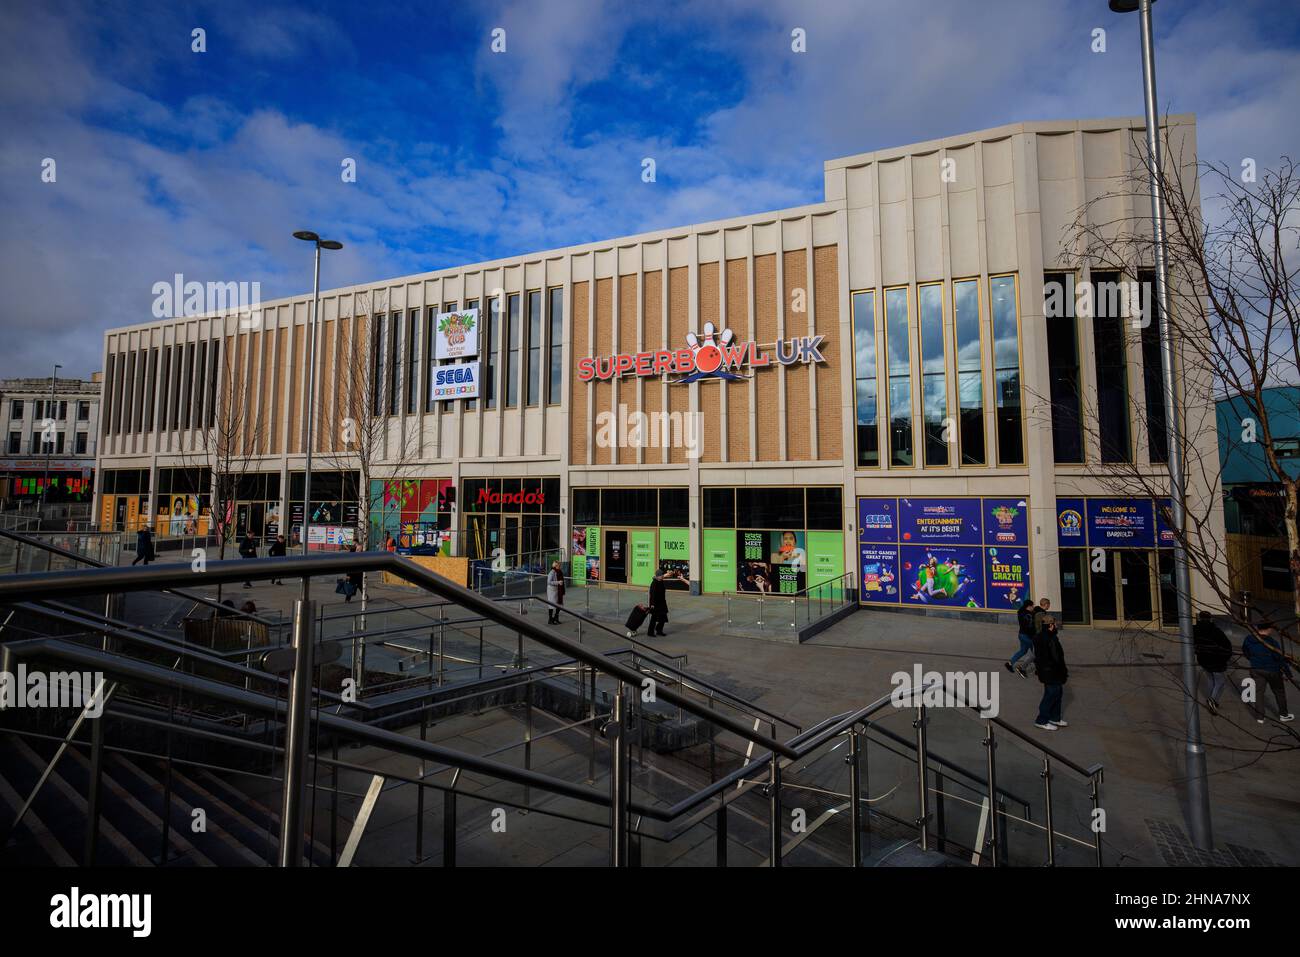 The Glass Works Barnsley is a development in Barnsley town centre which contains a shopping mall, restaurants, a cinema and a bowling alley. Barnsley Stock Photo